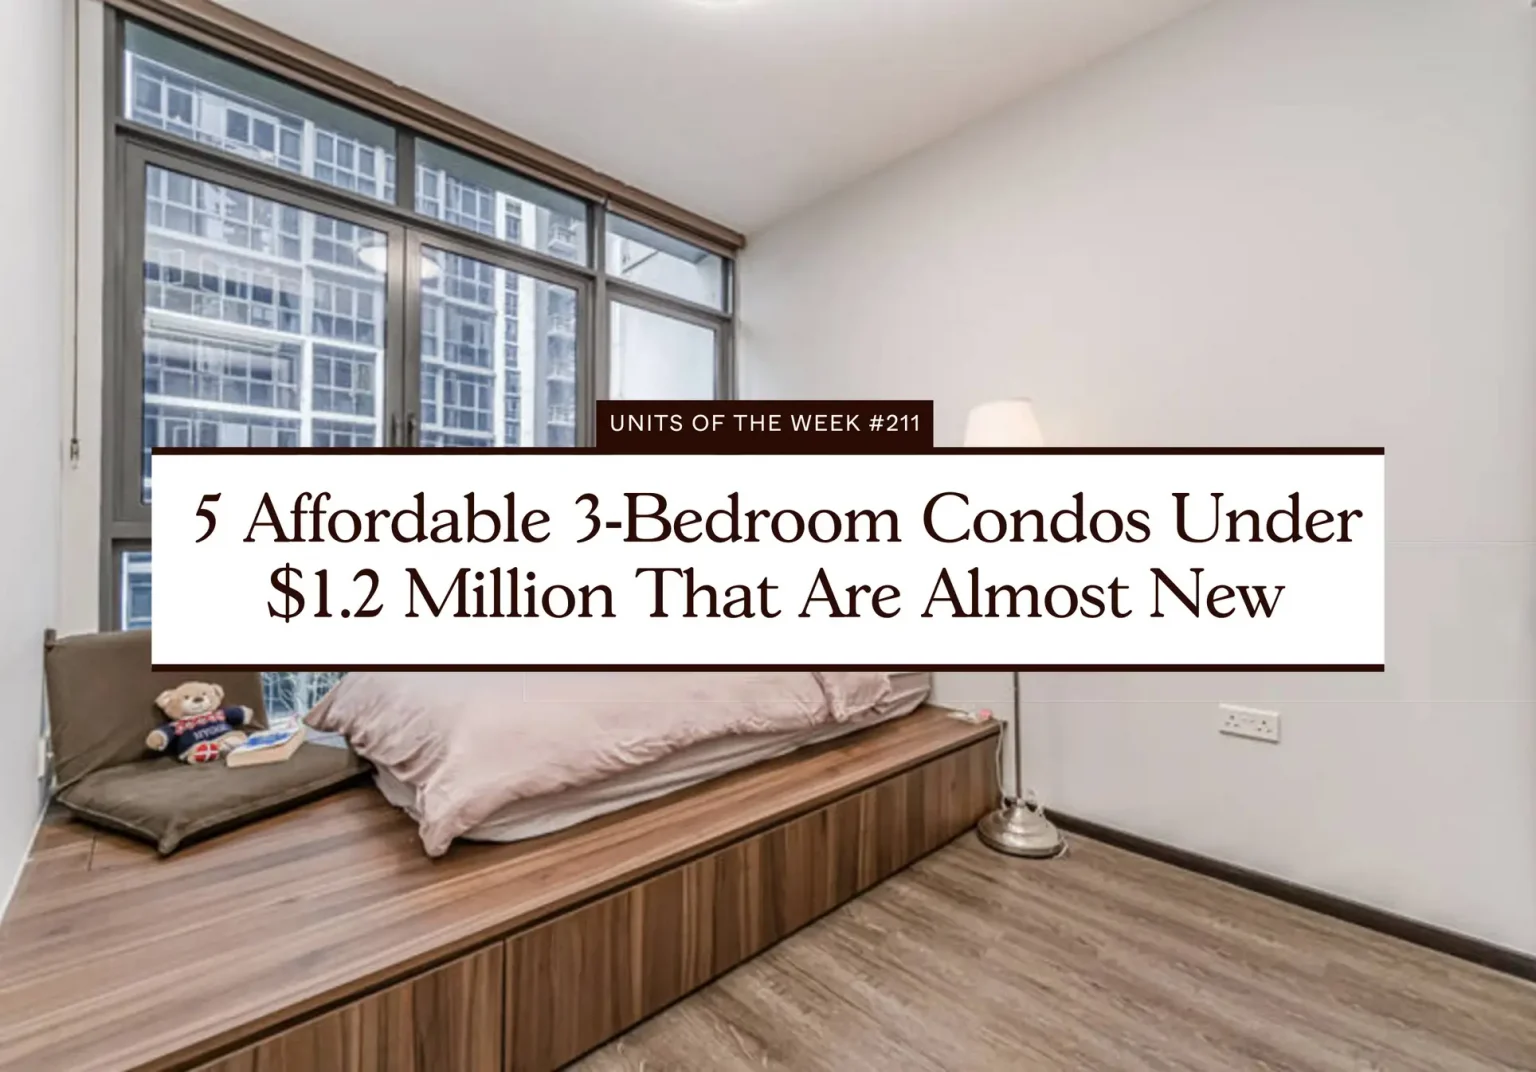 5 Affordable 3 Bedroom Condos Under 1.2 Million That Are Almost New